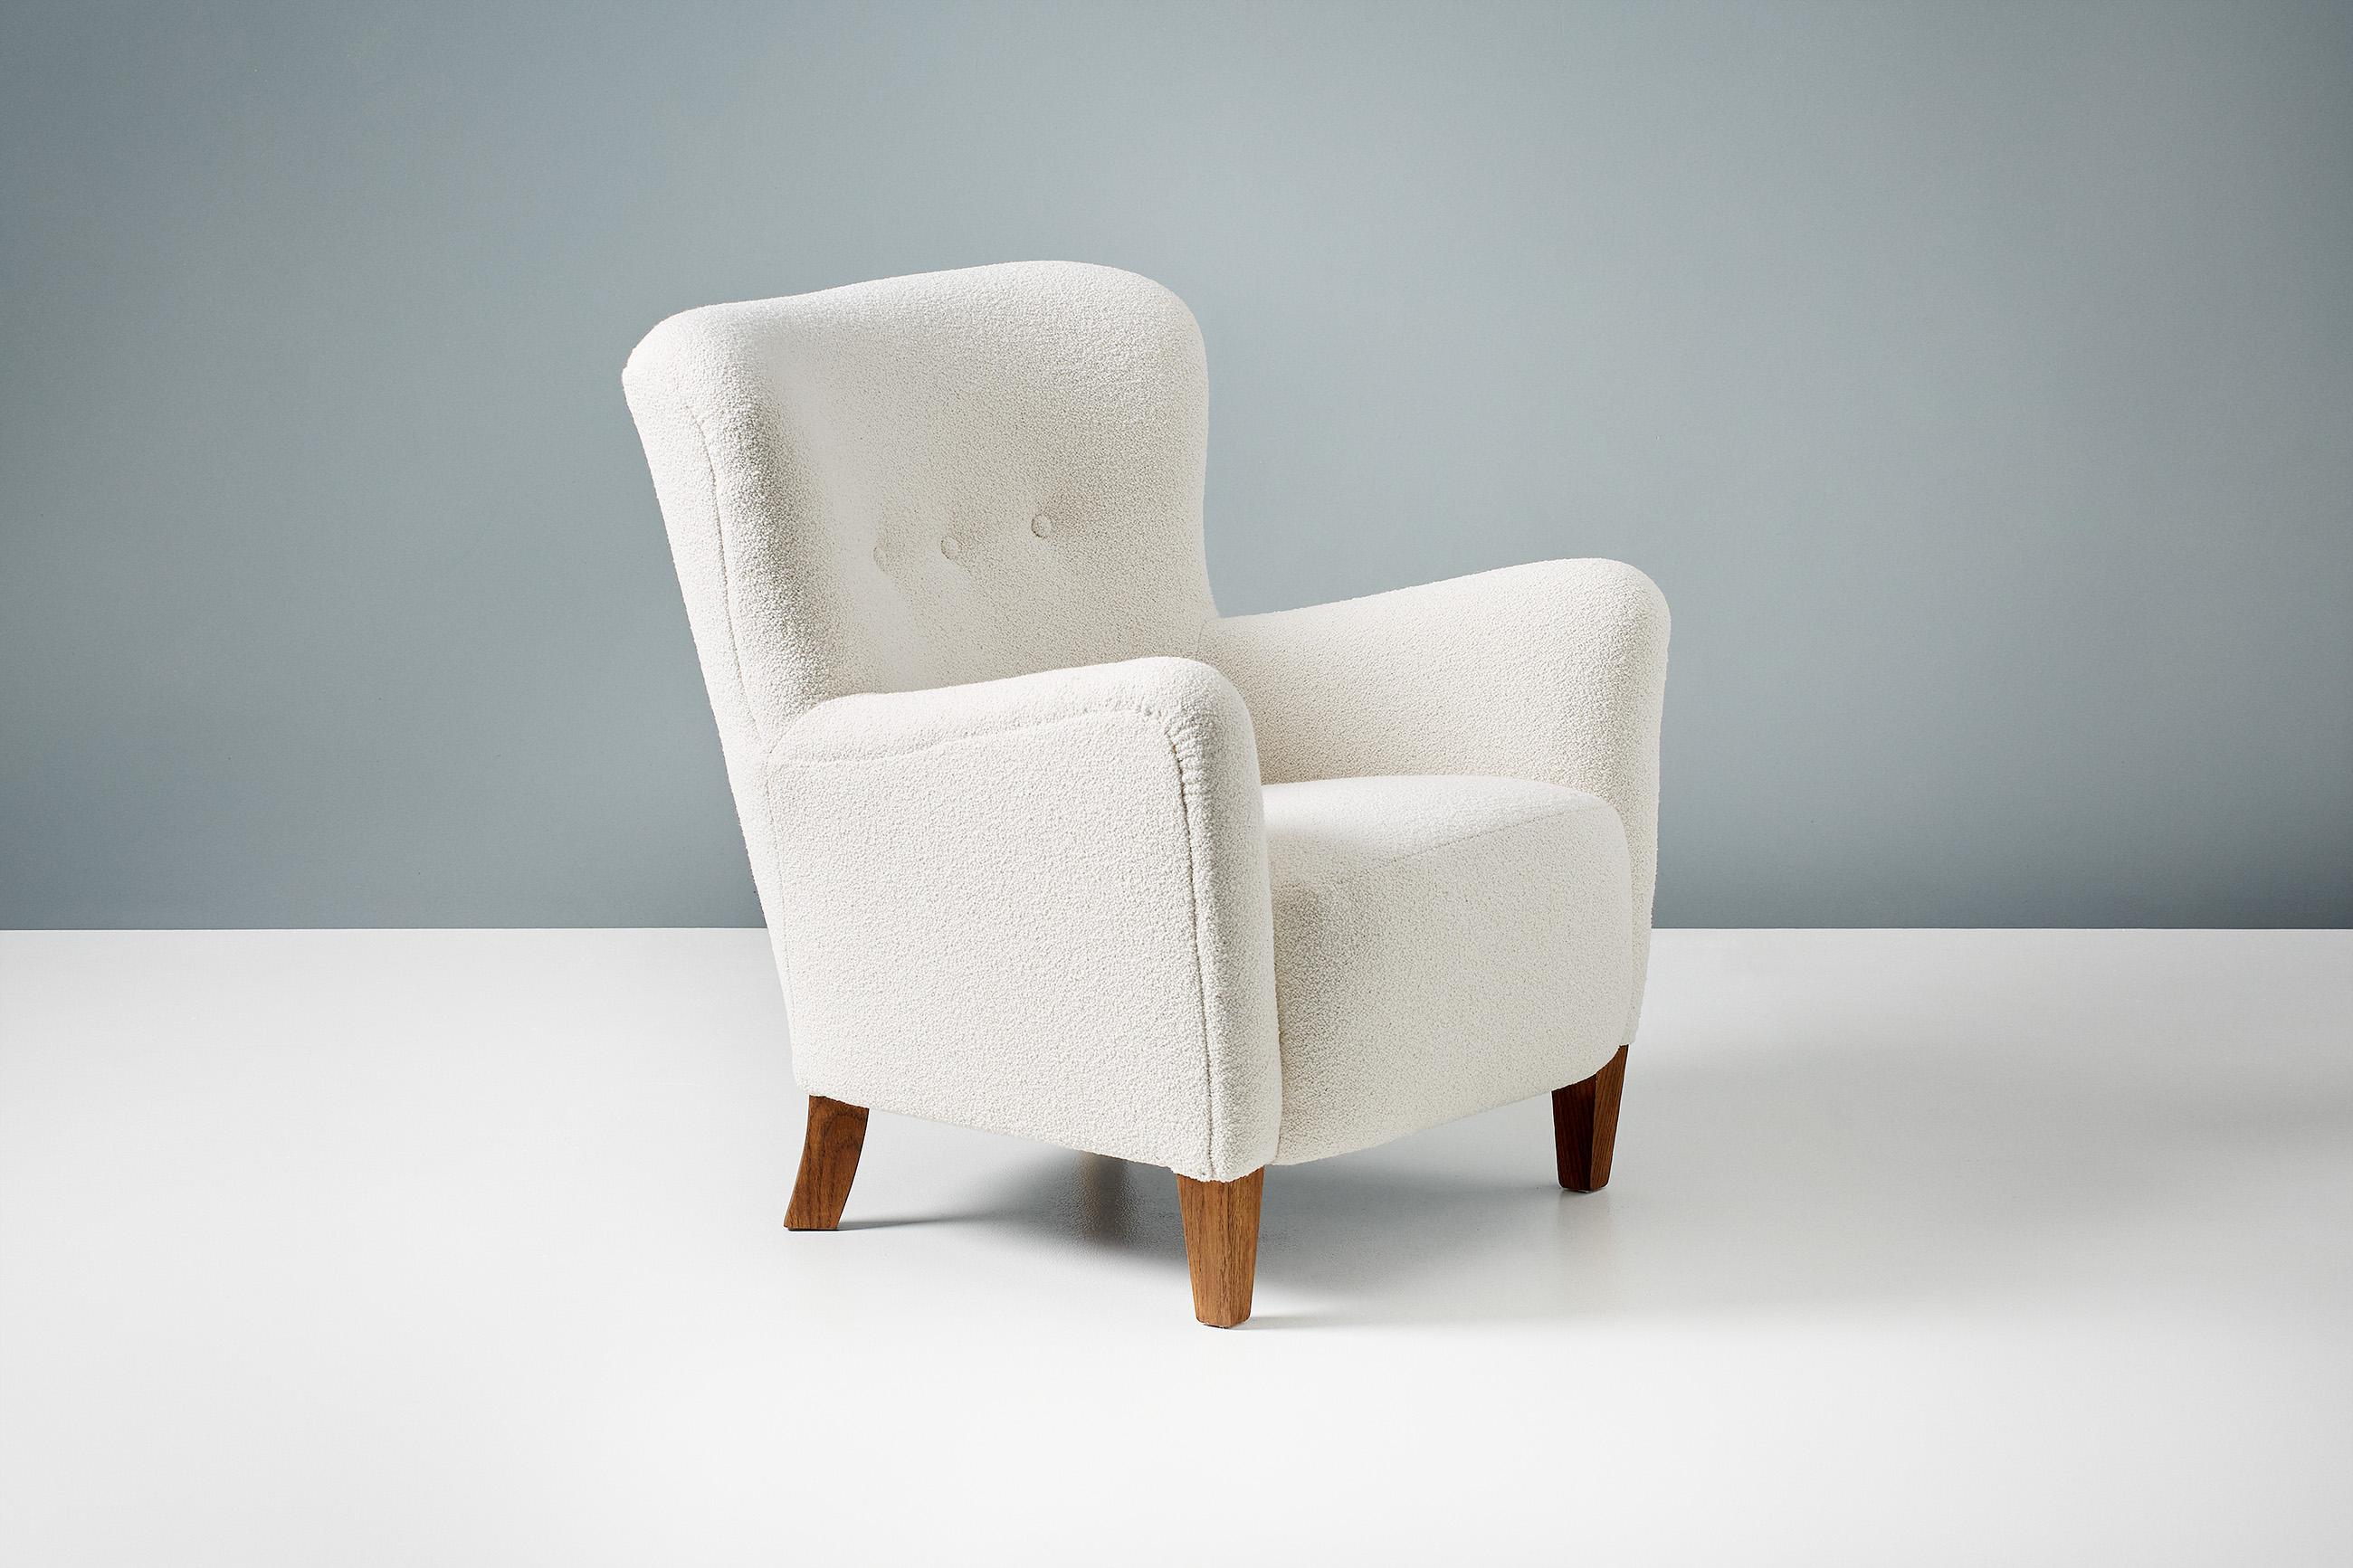 Dagmar Design - ryo lounge chair

The Ryo lounge chair is from our custom-made upholstered range. This piece has been developed and hand-made at our workshops in London using the highest quality materials. The frame is constructed from solid beech